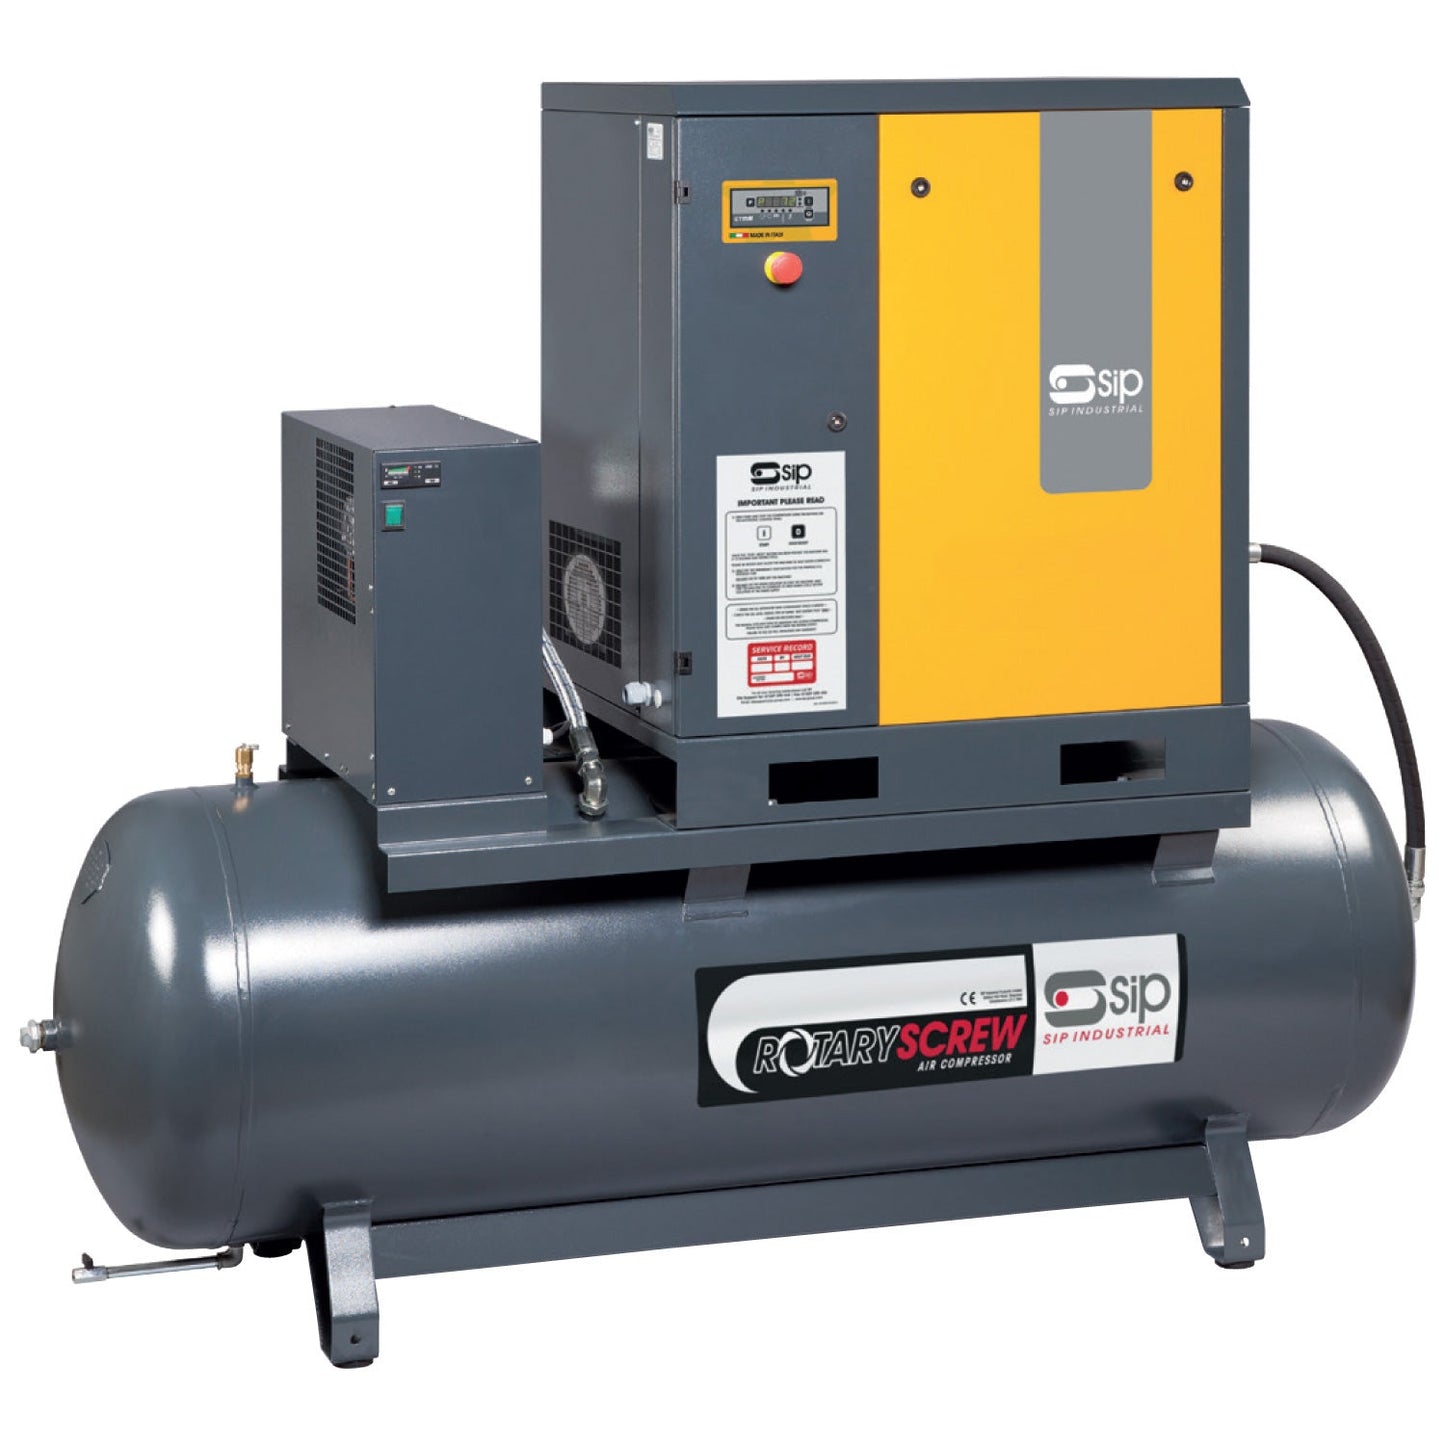 SIP RS08-08-500BD/RD 500ltr Rotary Screw Compressor with Dryer, Sip Industrial